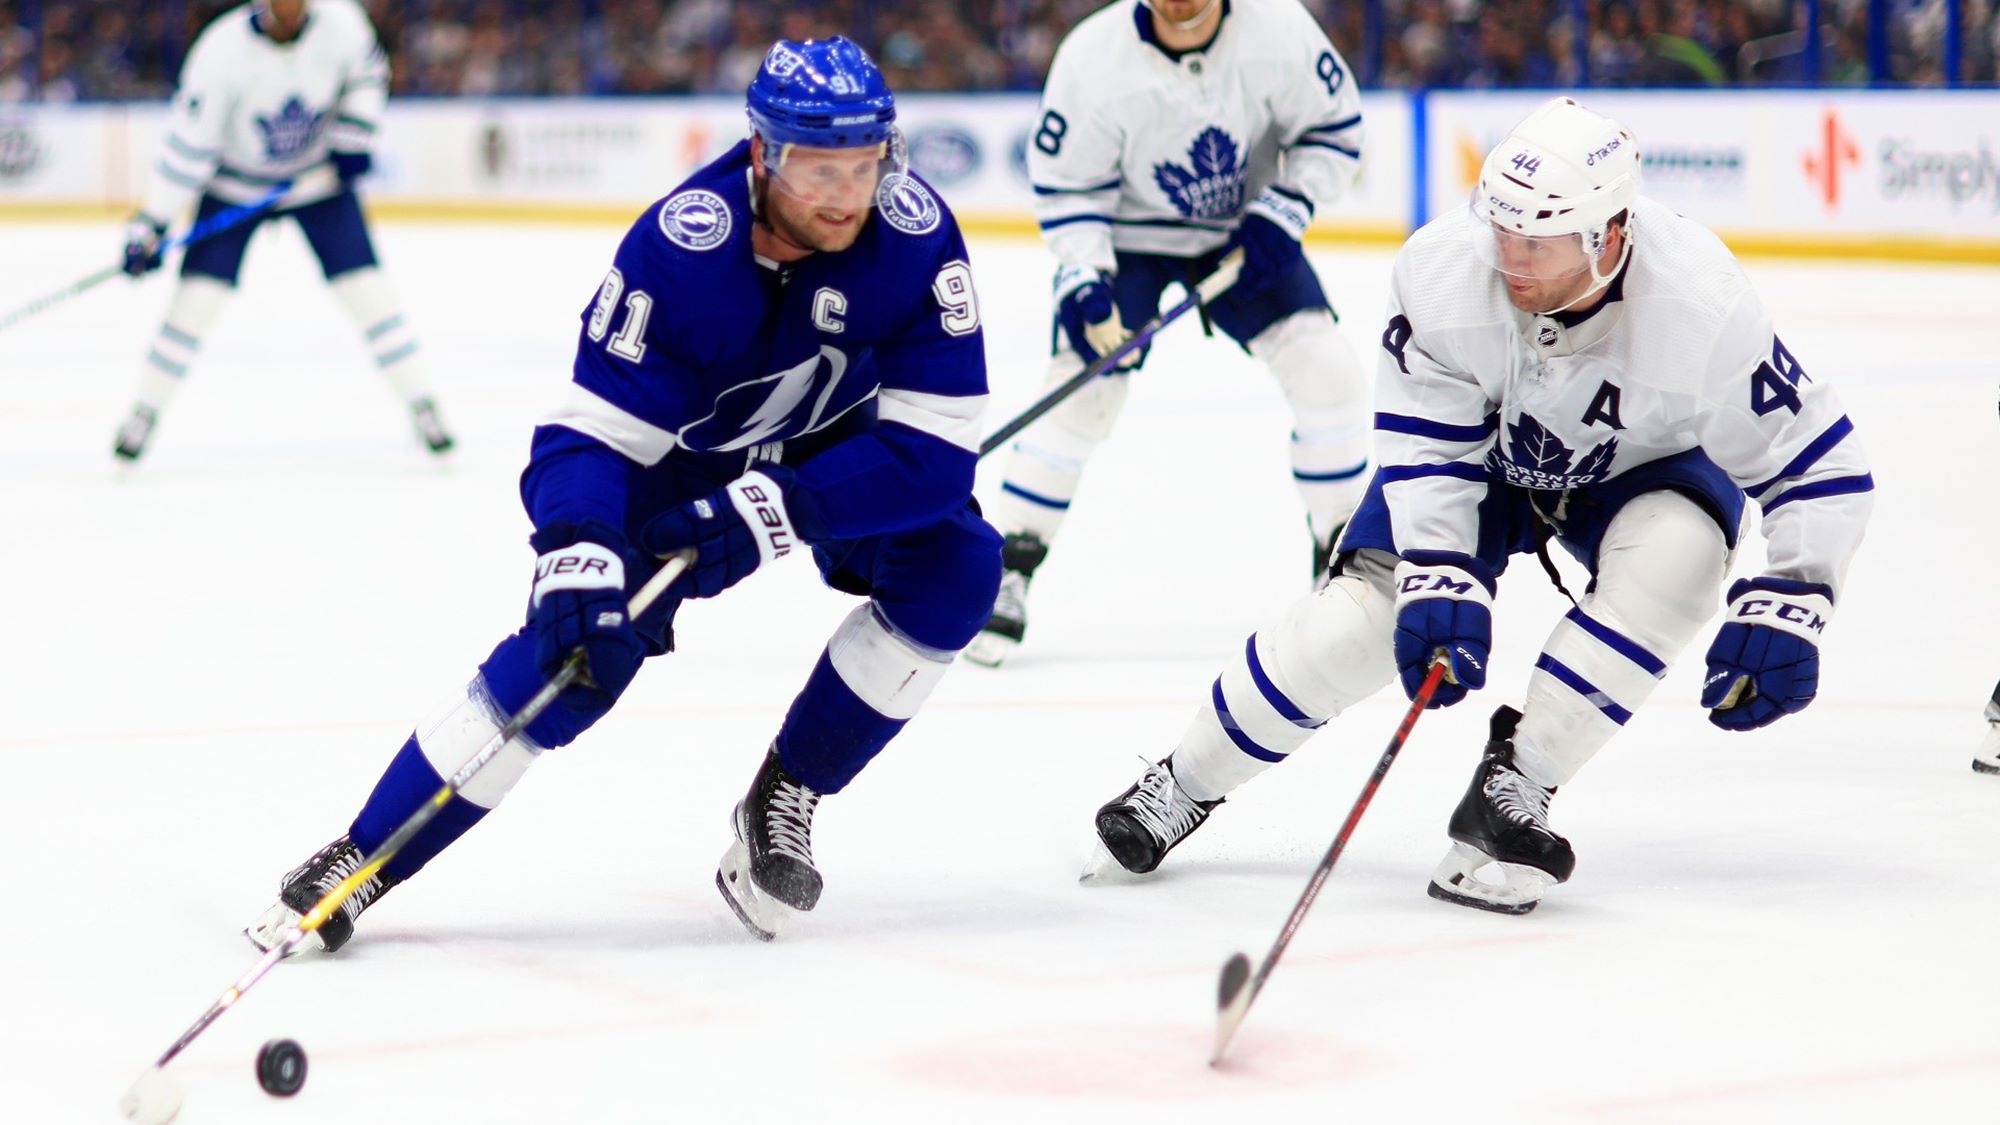 How To Watch Lightning Games Without Cable